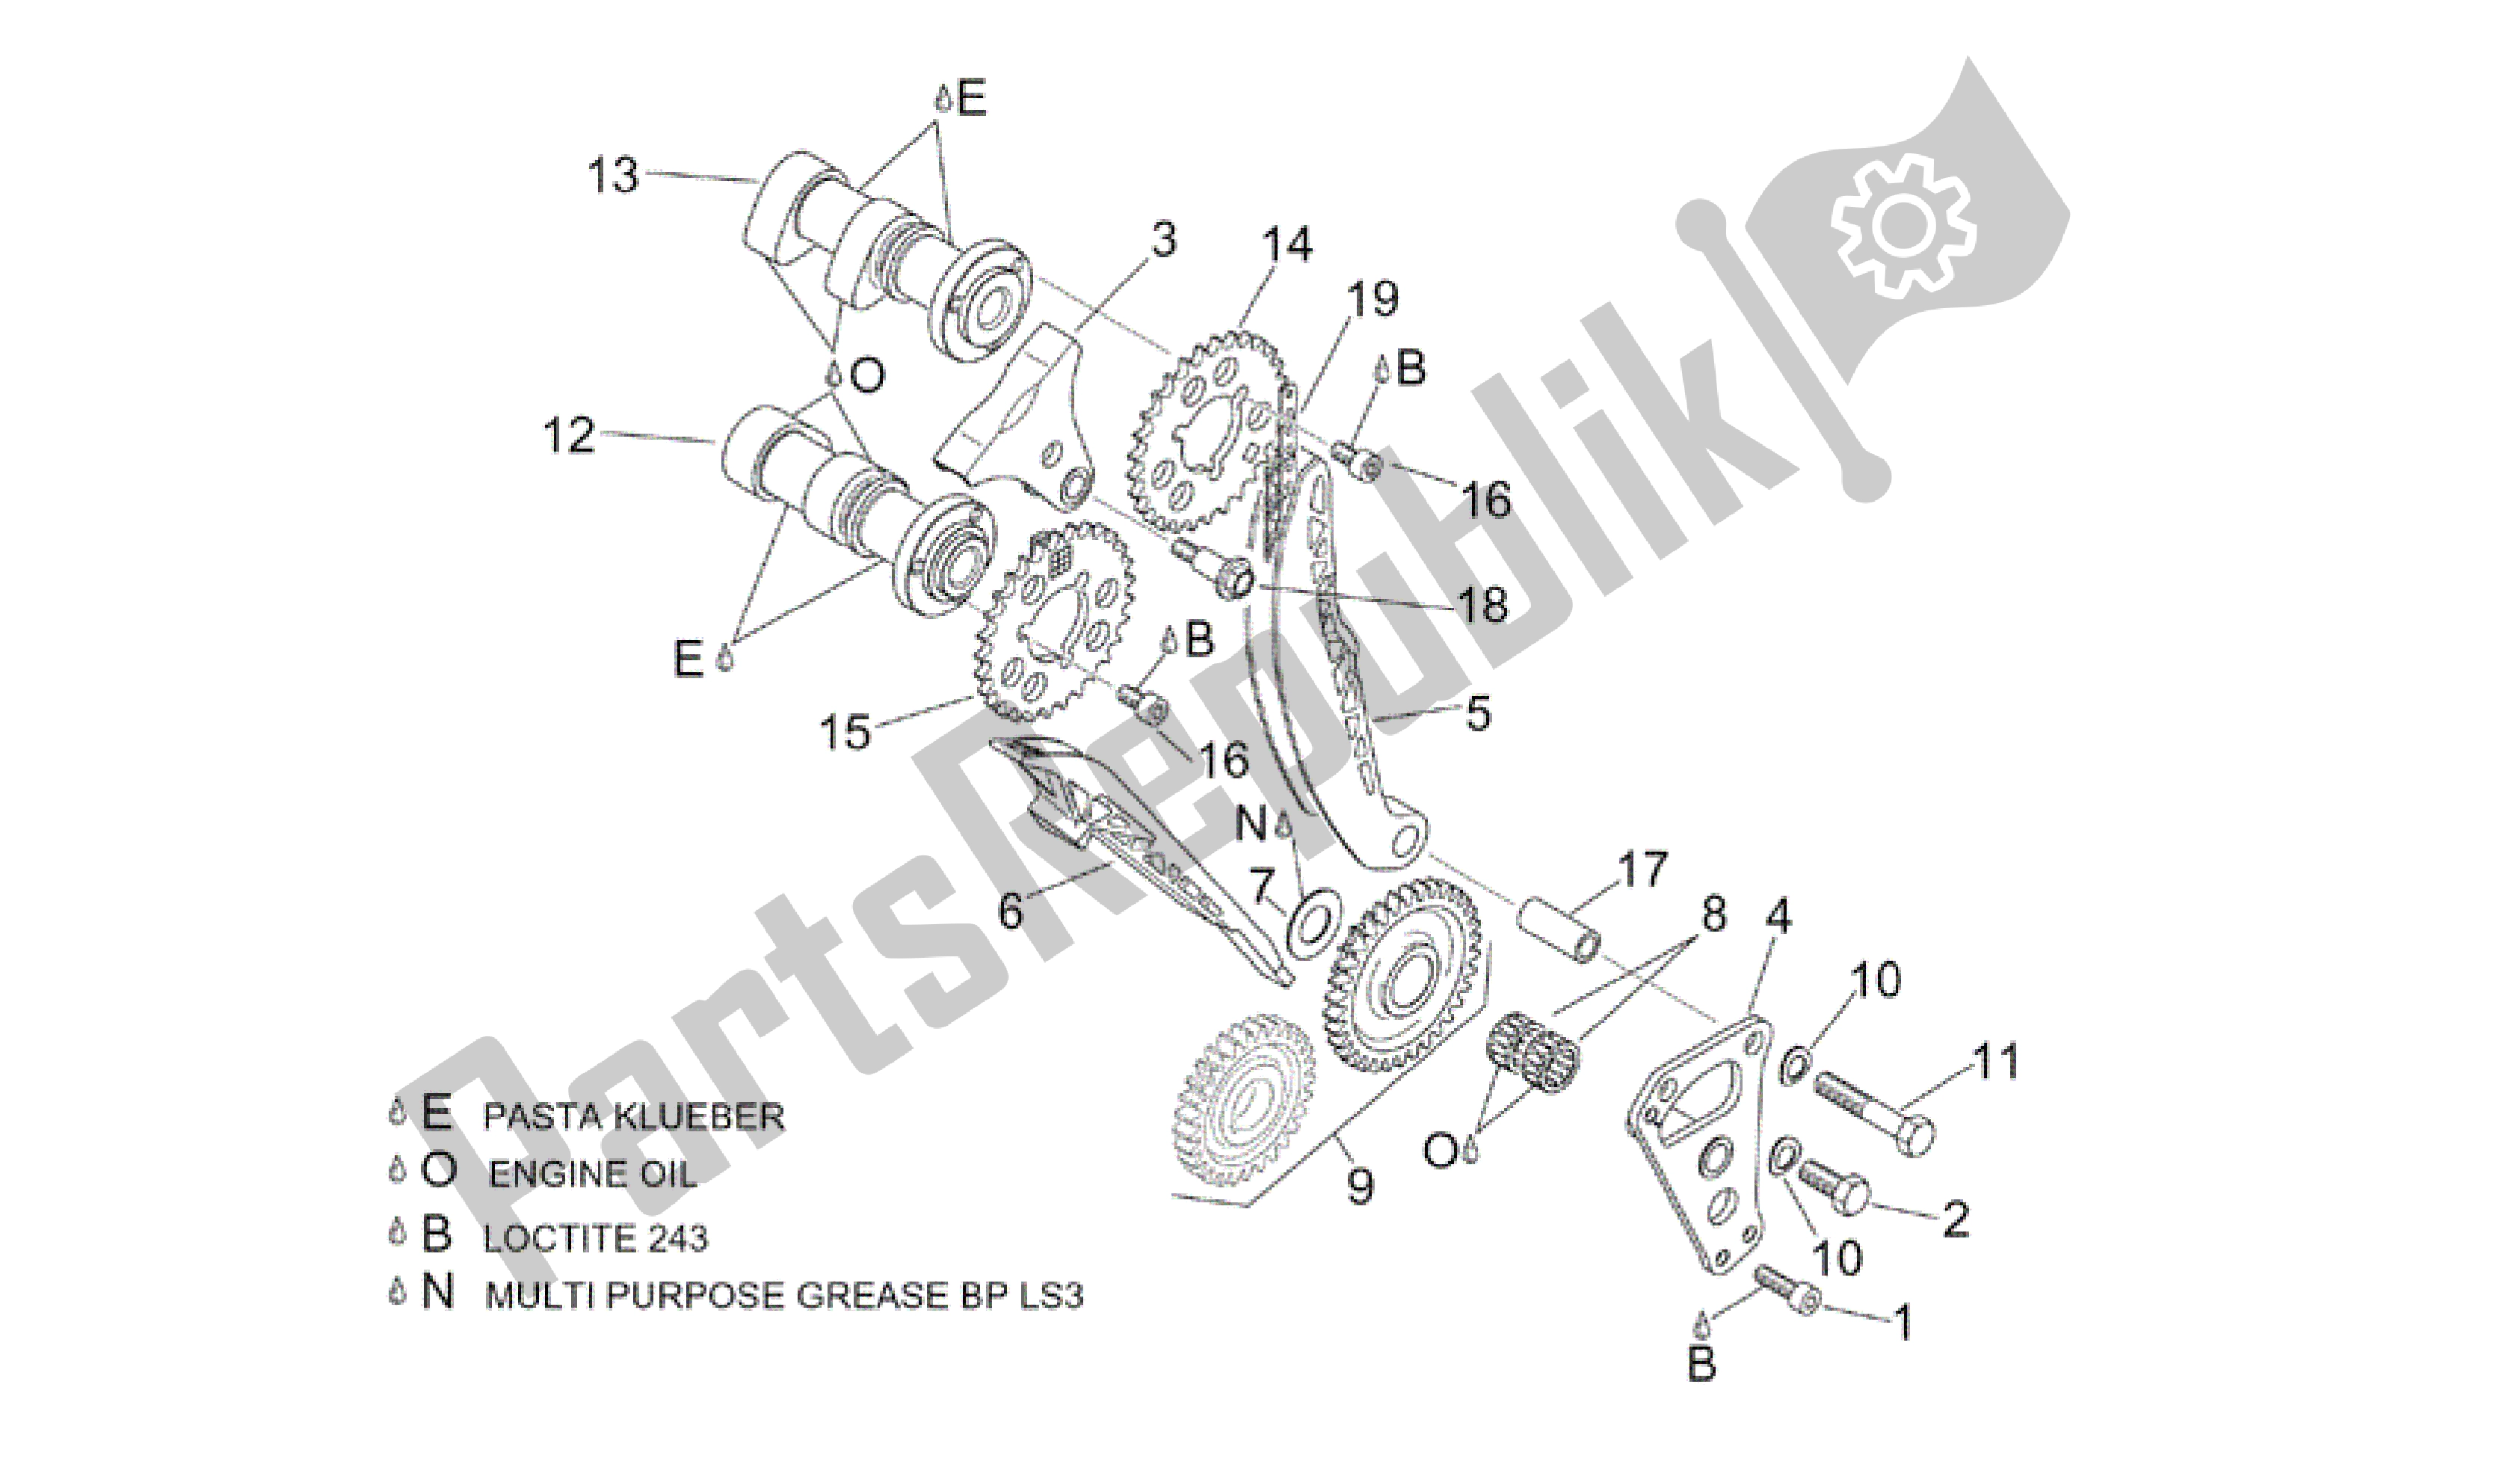 All parts for the Front Cylinder Timing System of the Aprilia RSV Tuono R Factory 1000 2004 - 2005